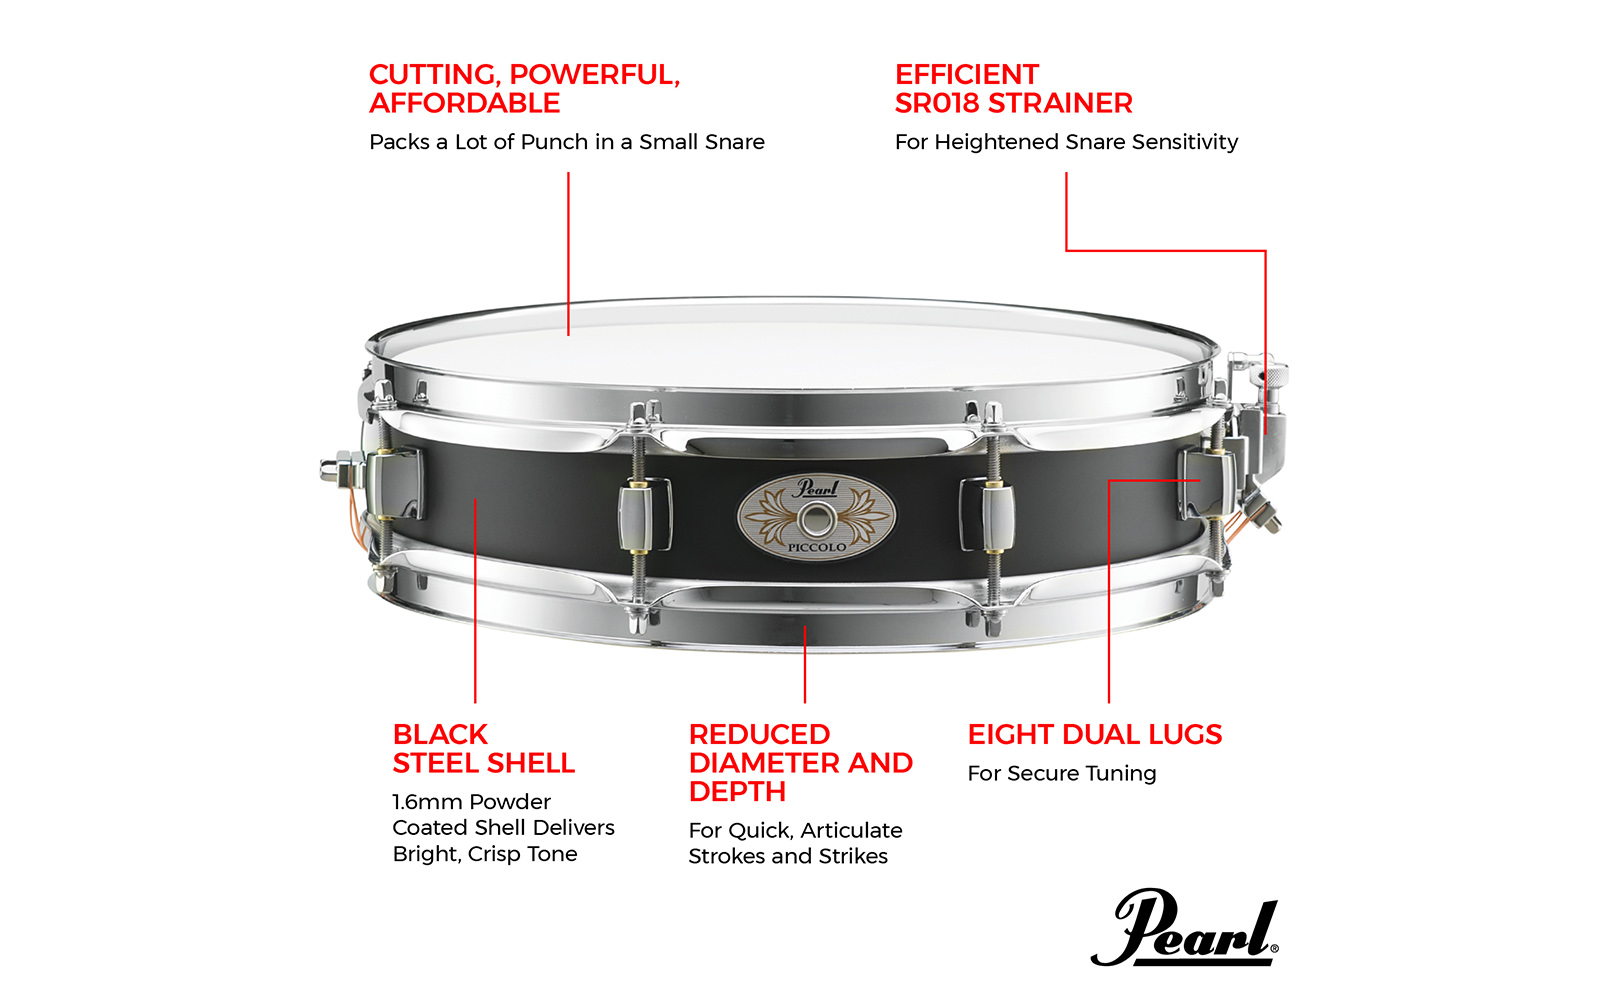 https://pearldrum.com/sites/default/files/image_folder/PRODUCTS/SNARES/EFFECT_SNARES/STEEL_13X3/805-500_S1330B_Features_Infographic.jpg